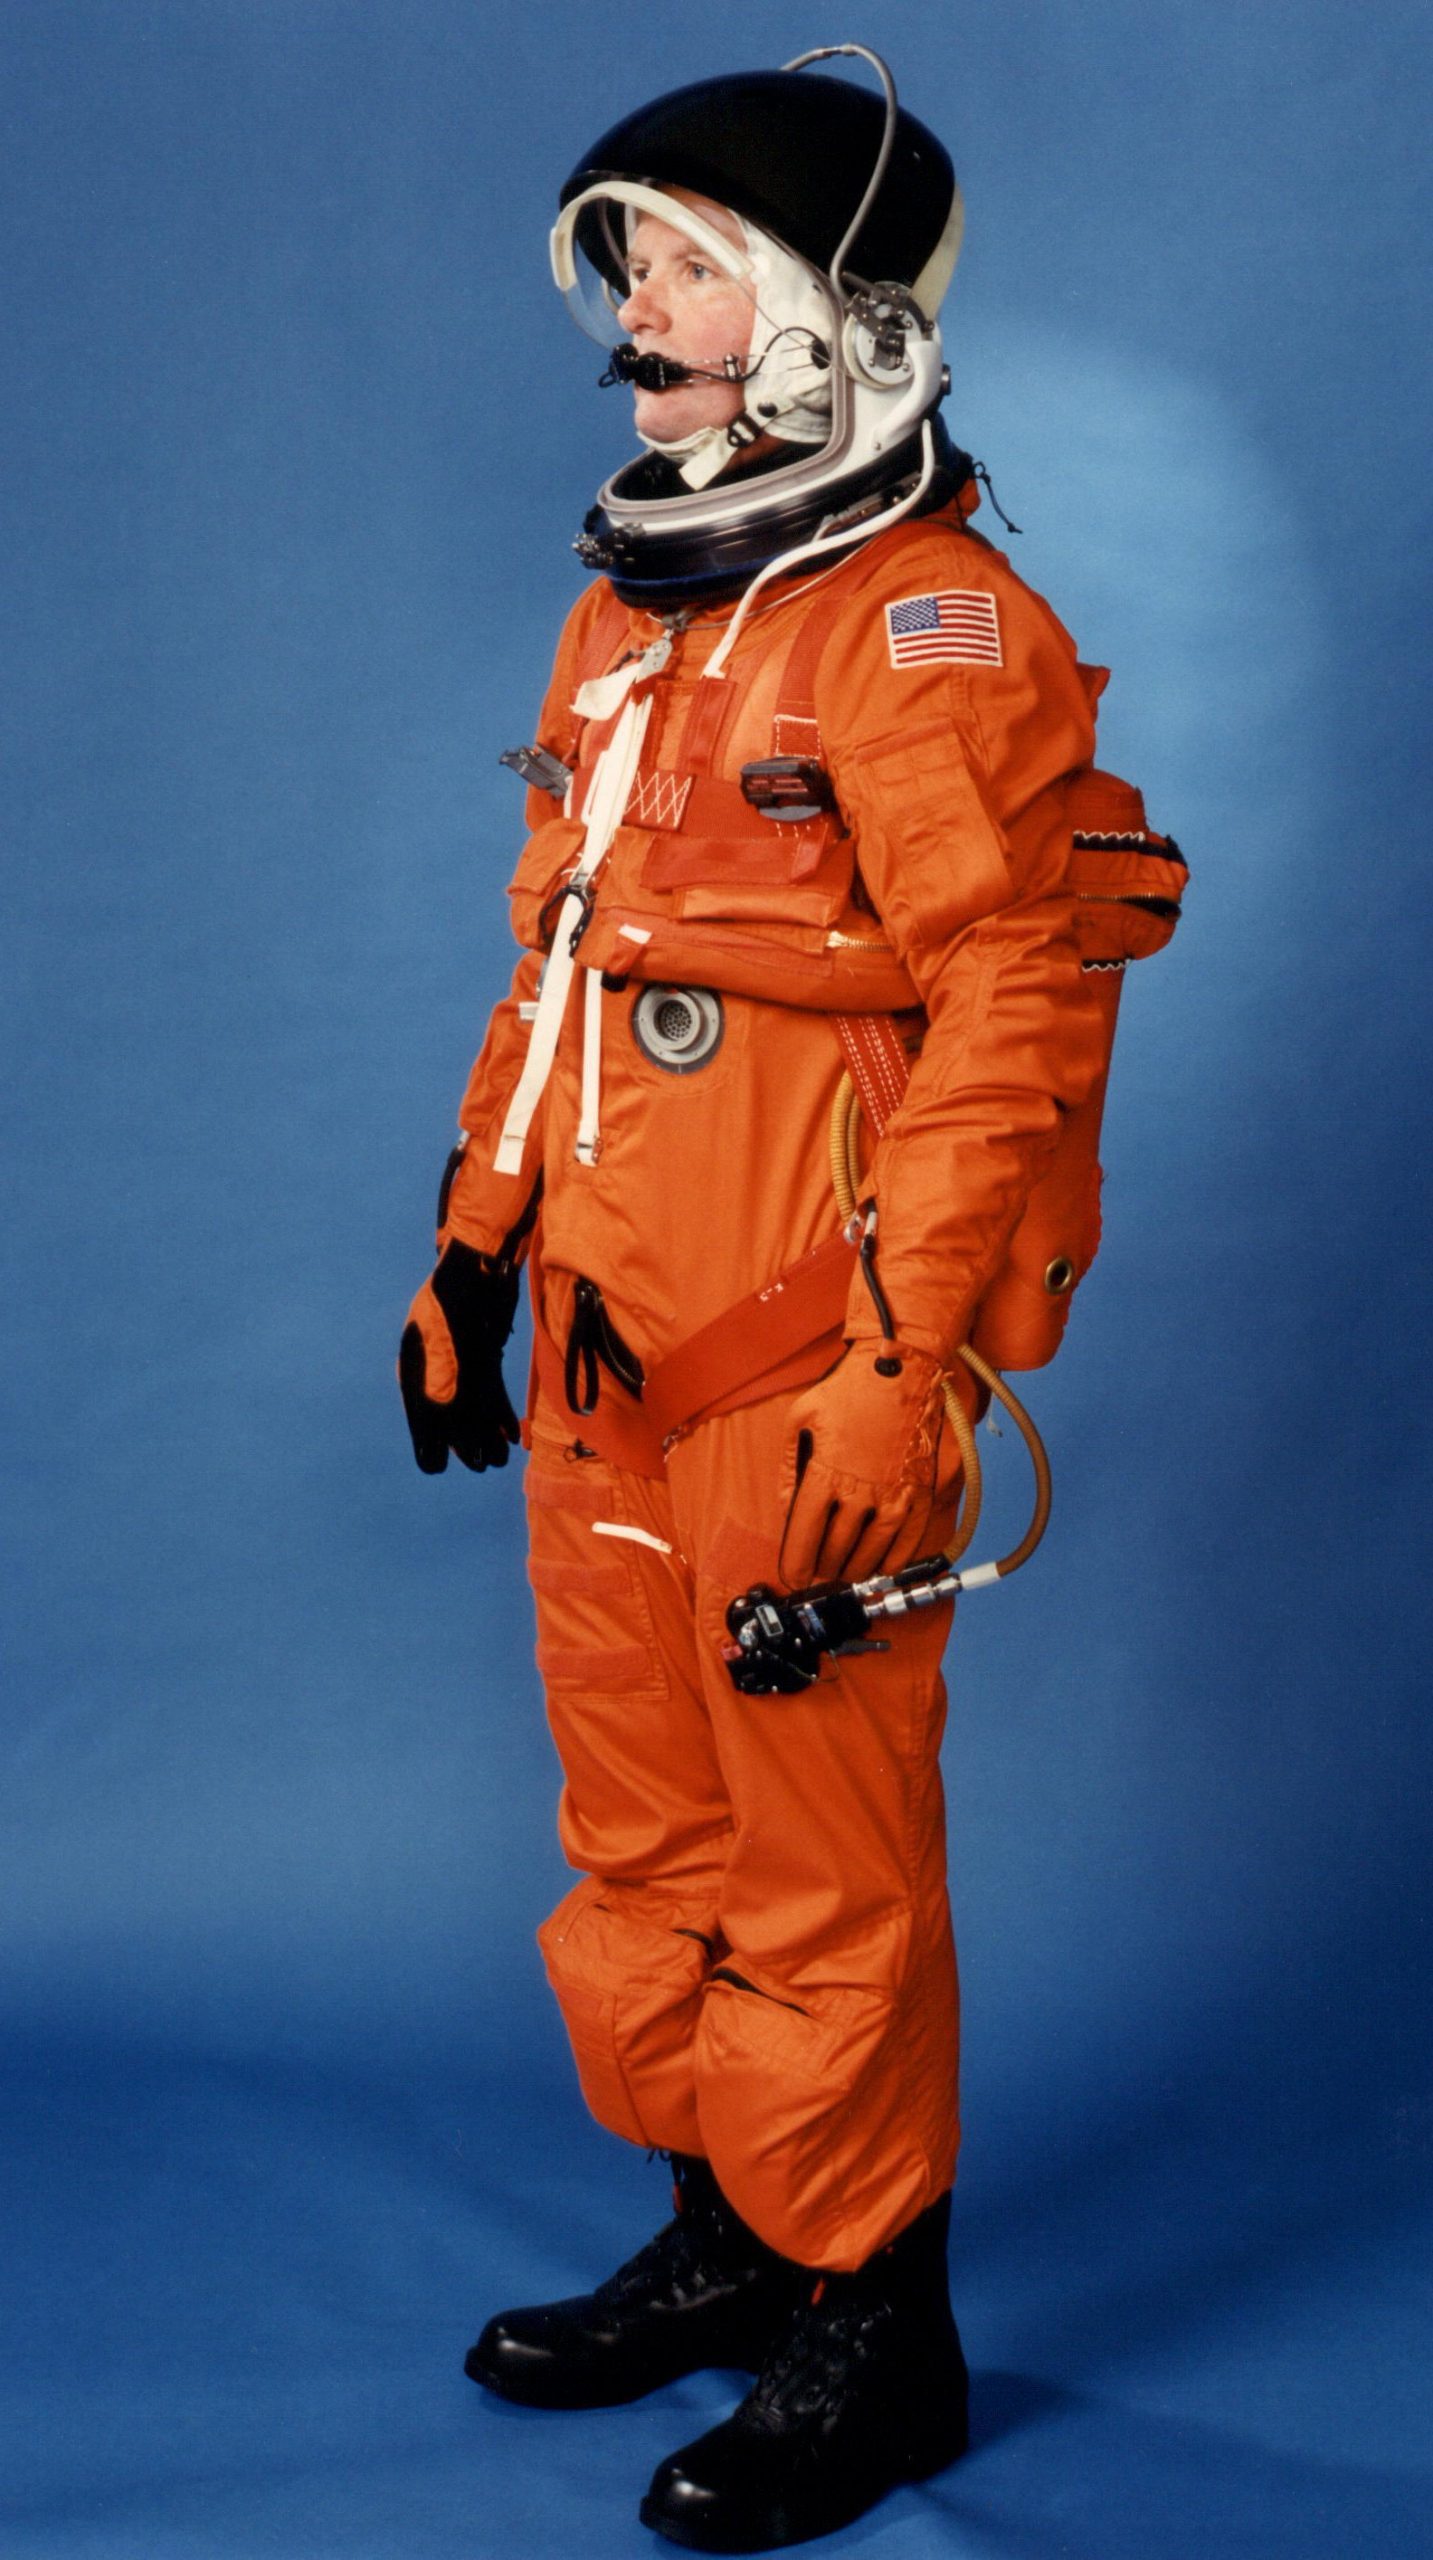 The launch entry suit modeled by a technician